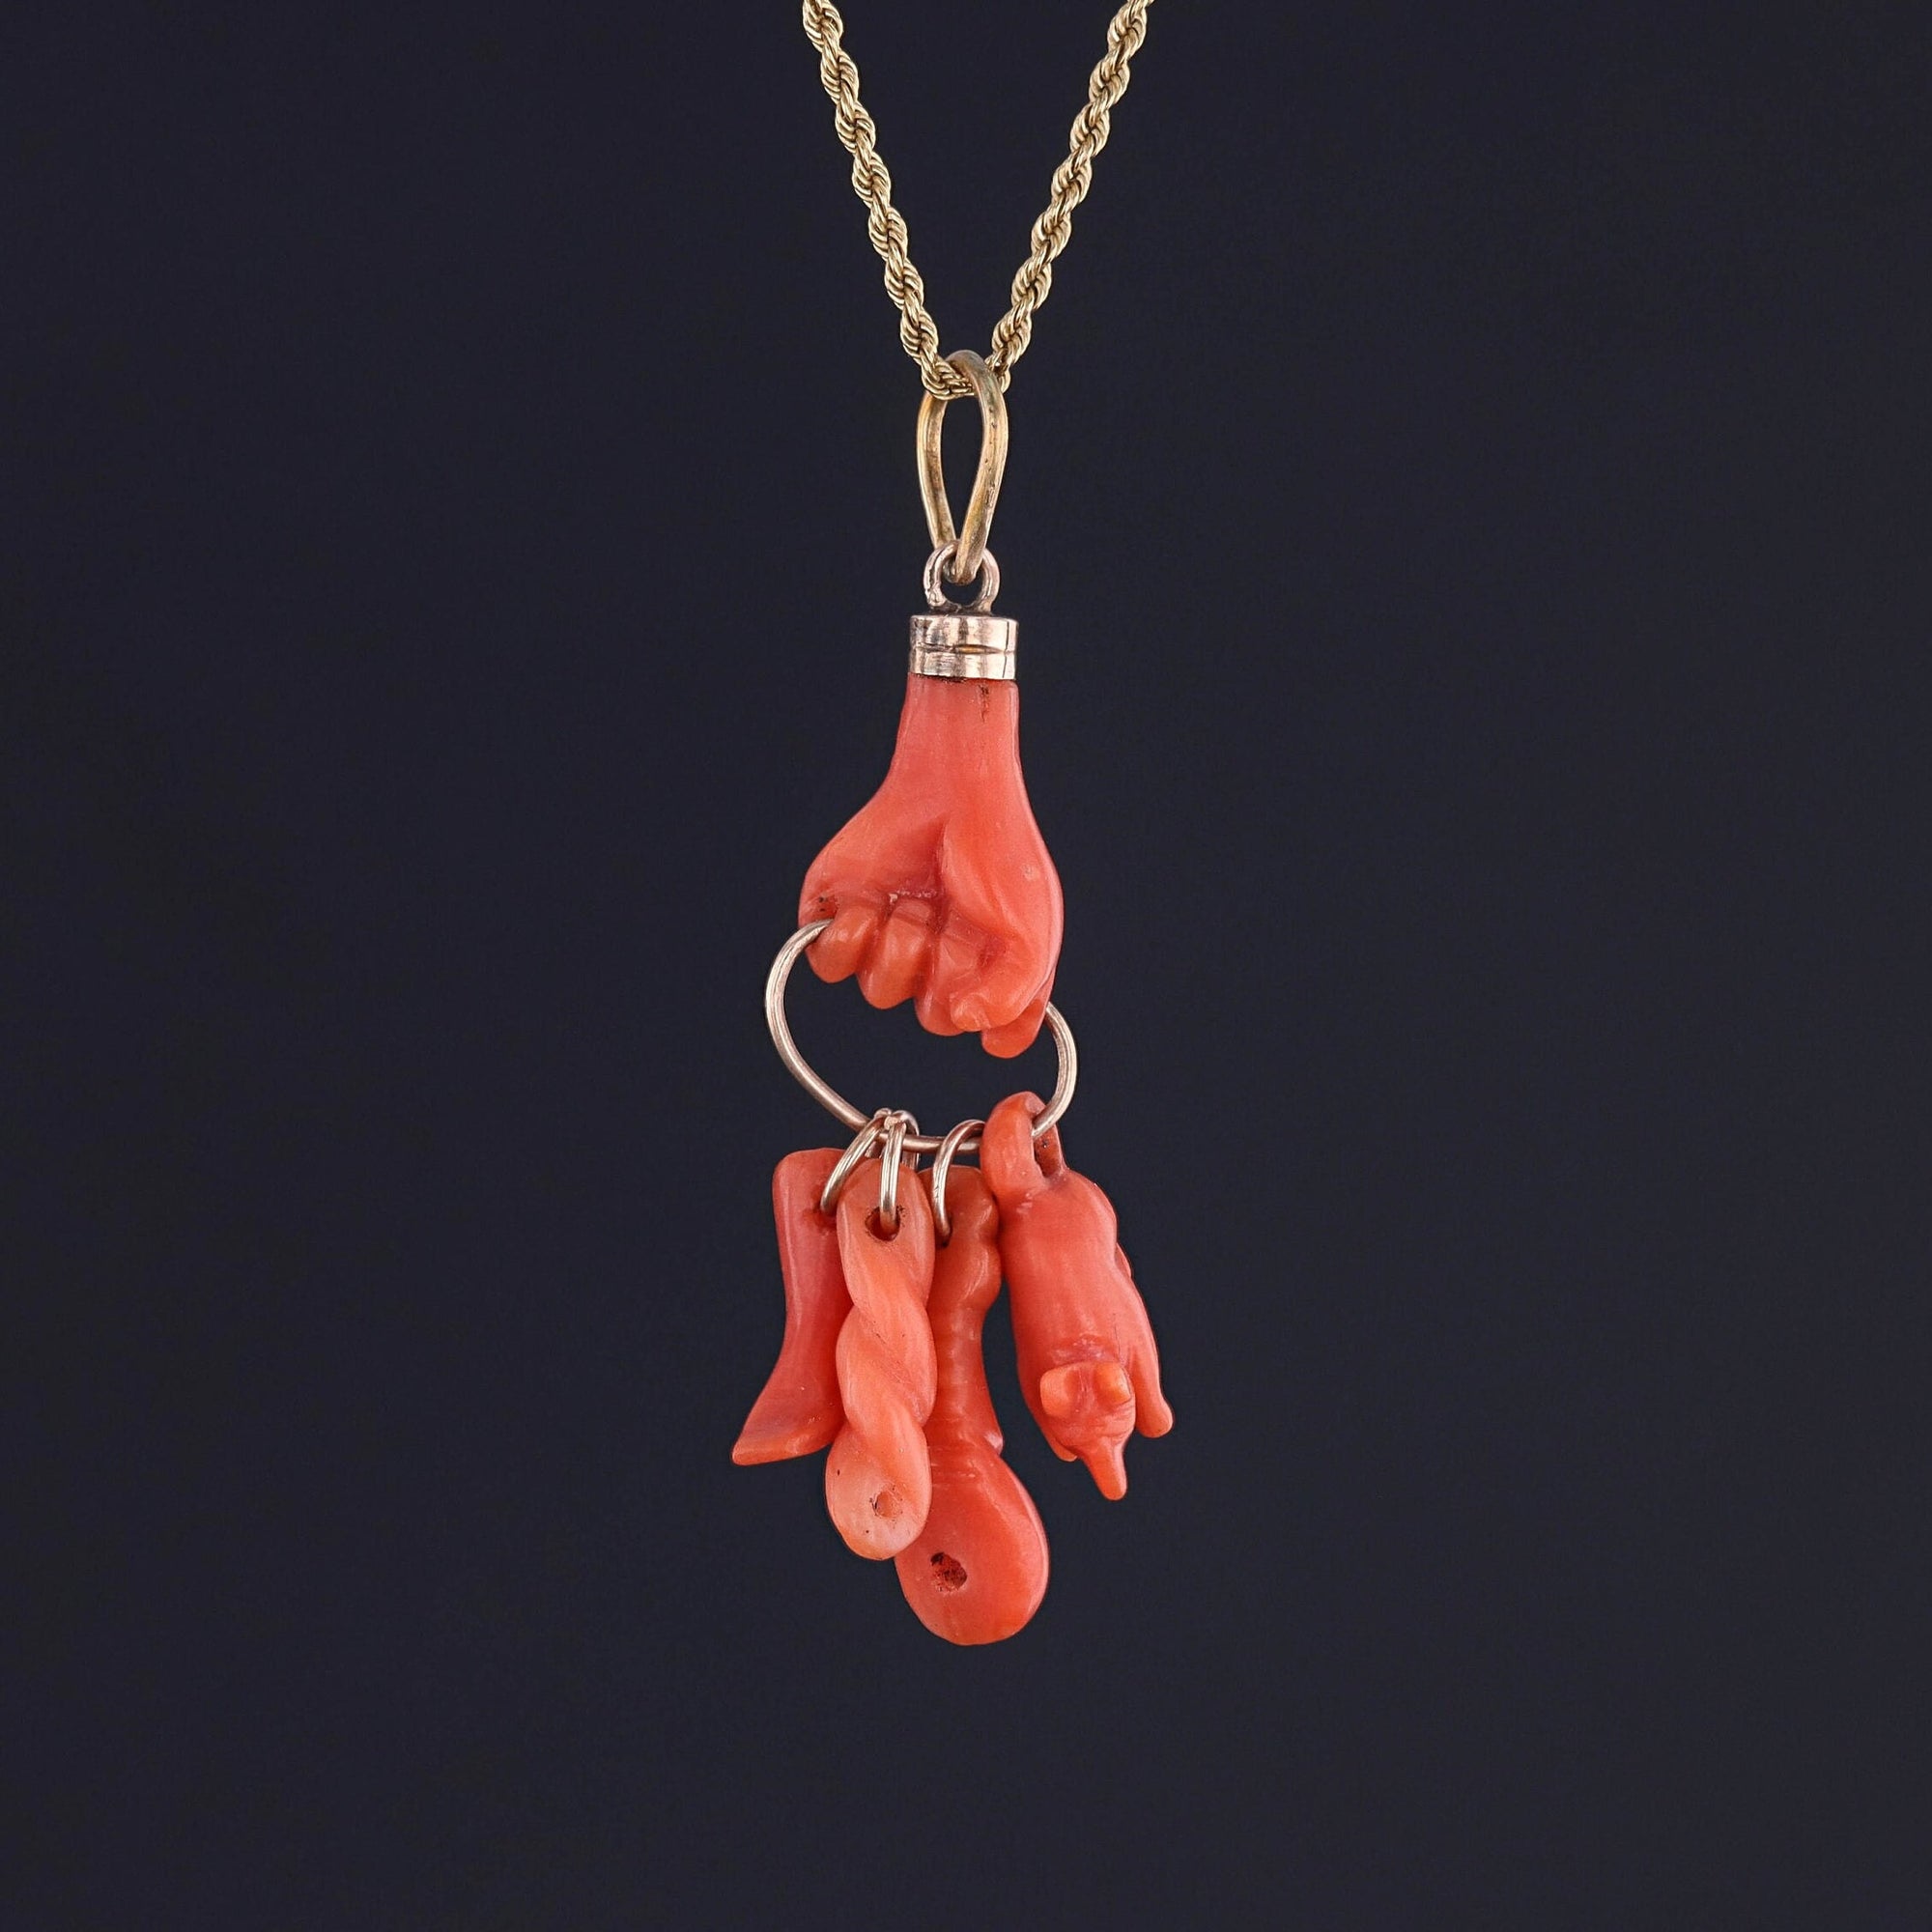 Antique Coral Hand Charm Pendant of 14k Gold